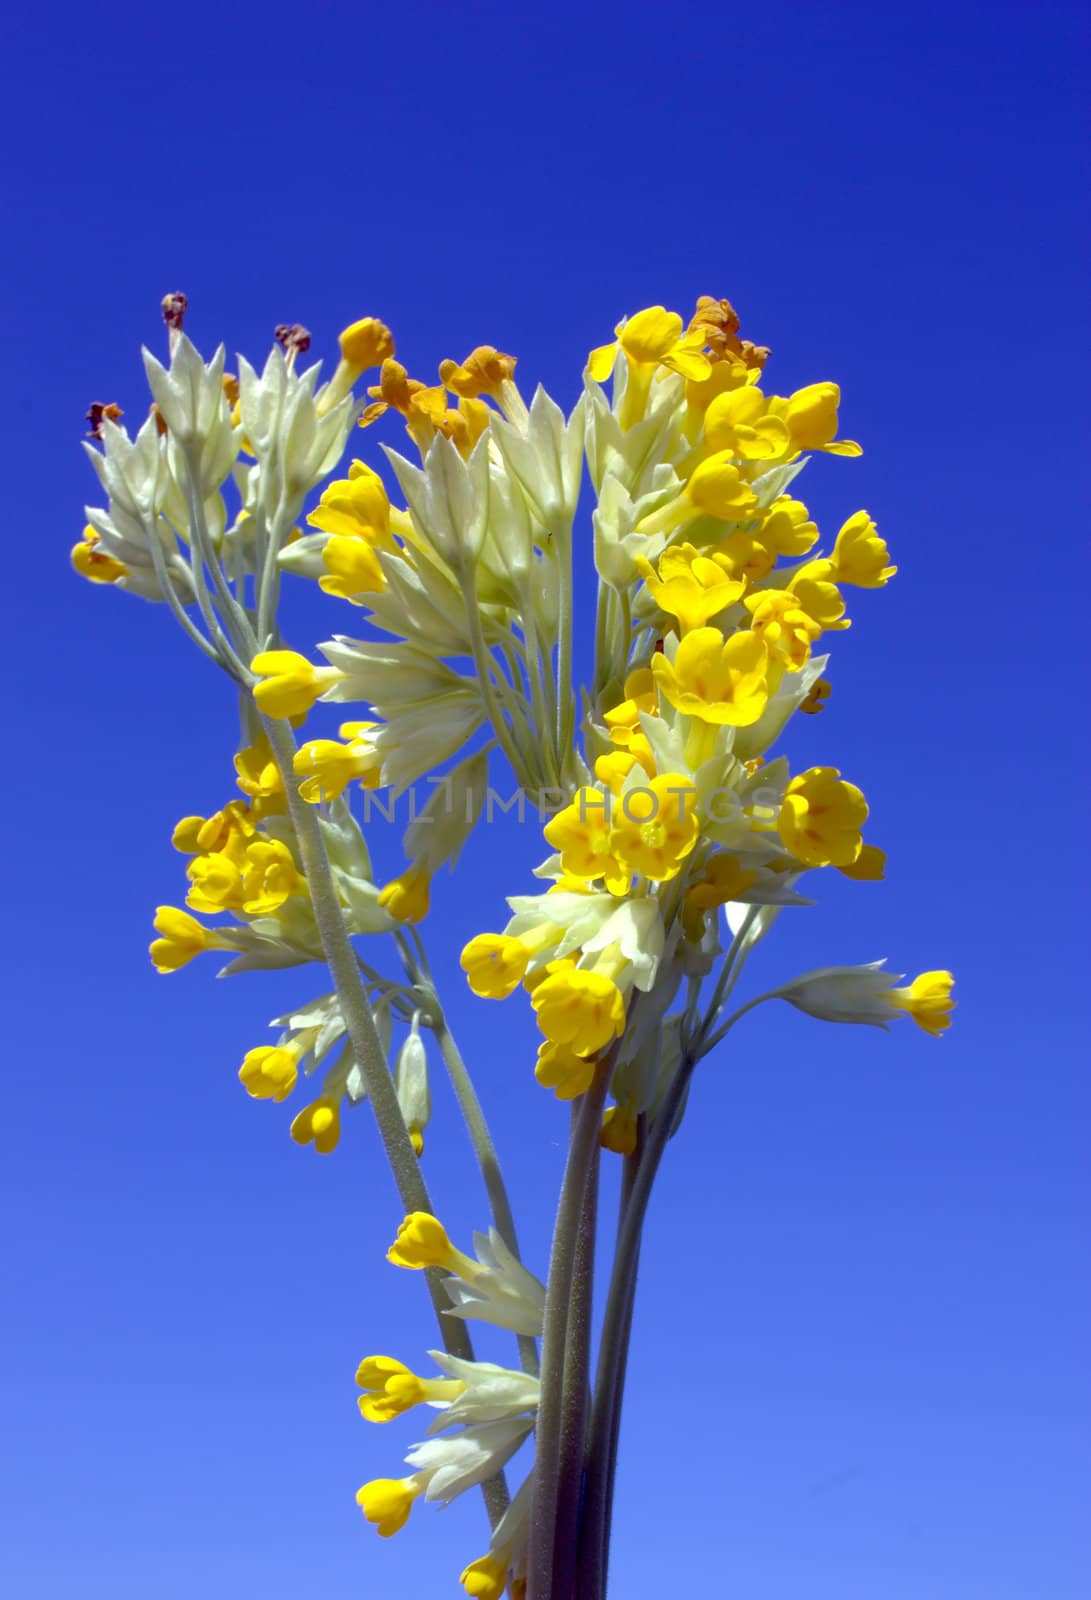 Yellow flowers over blue sky by sergpet